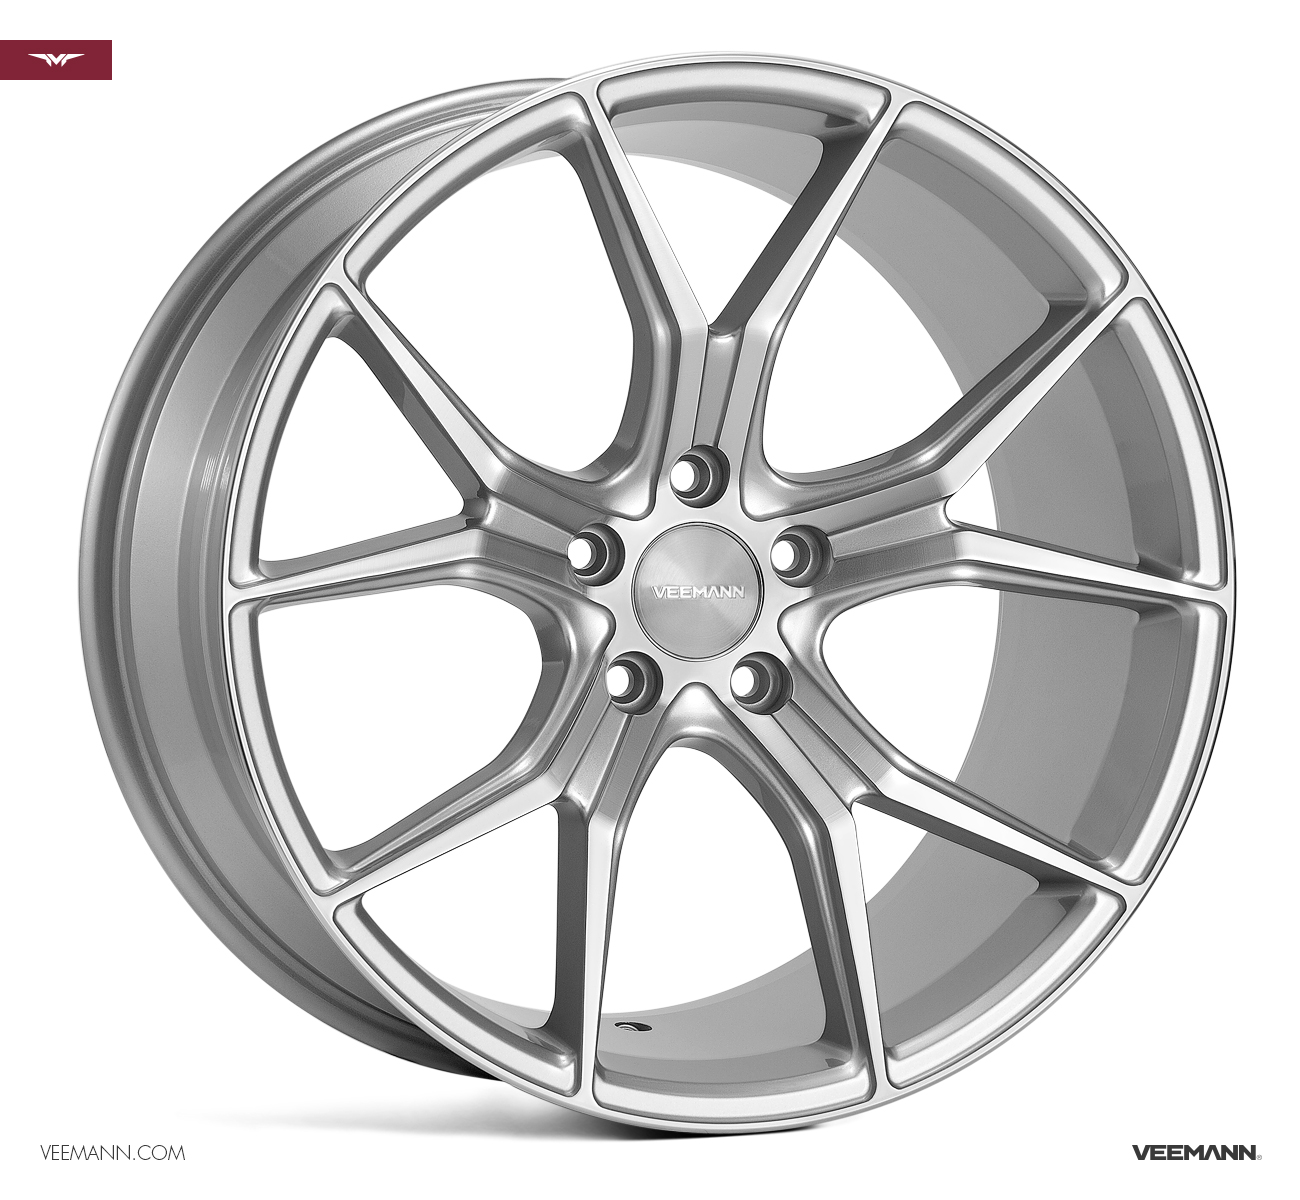 NEW 19  VEEMANN V FS20 CONCAVE ALLOY WHEELS IN SILVER WITH POLISHED FACE  WIDER 9 5  REAR et 42 40